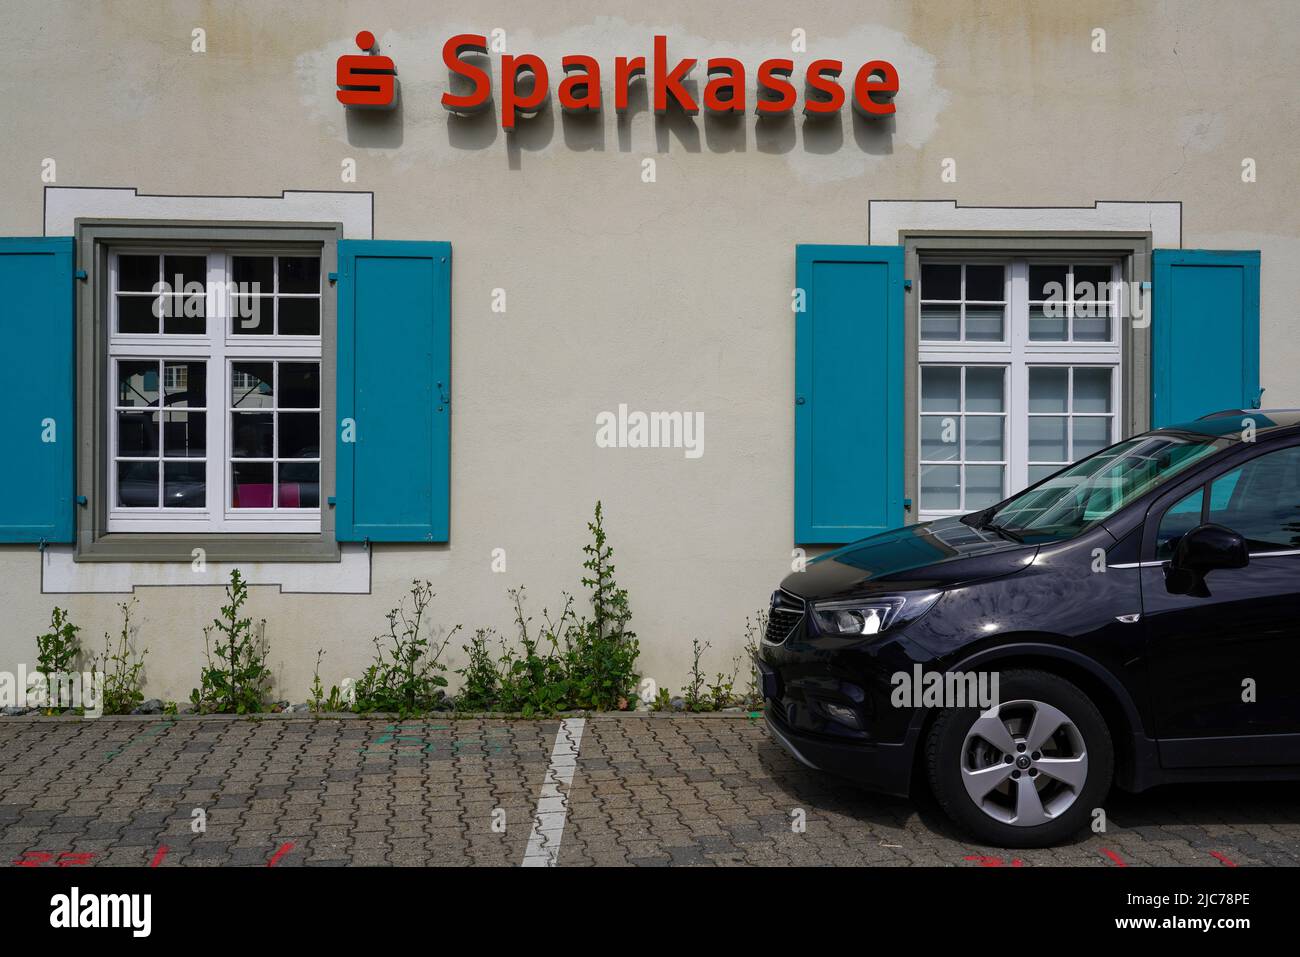 Savings bank sign on a house wall in front of which a car is parked, Aulendorf, Baden-Württemberg, Germany, 6.6.22 Stock Photo